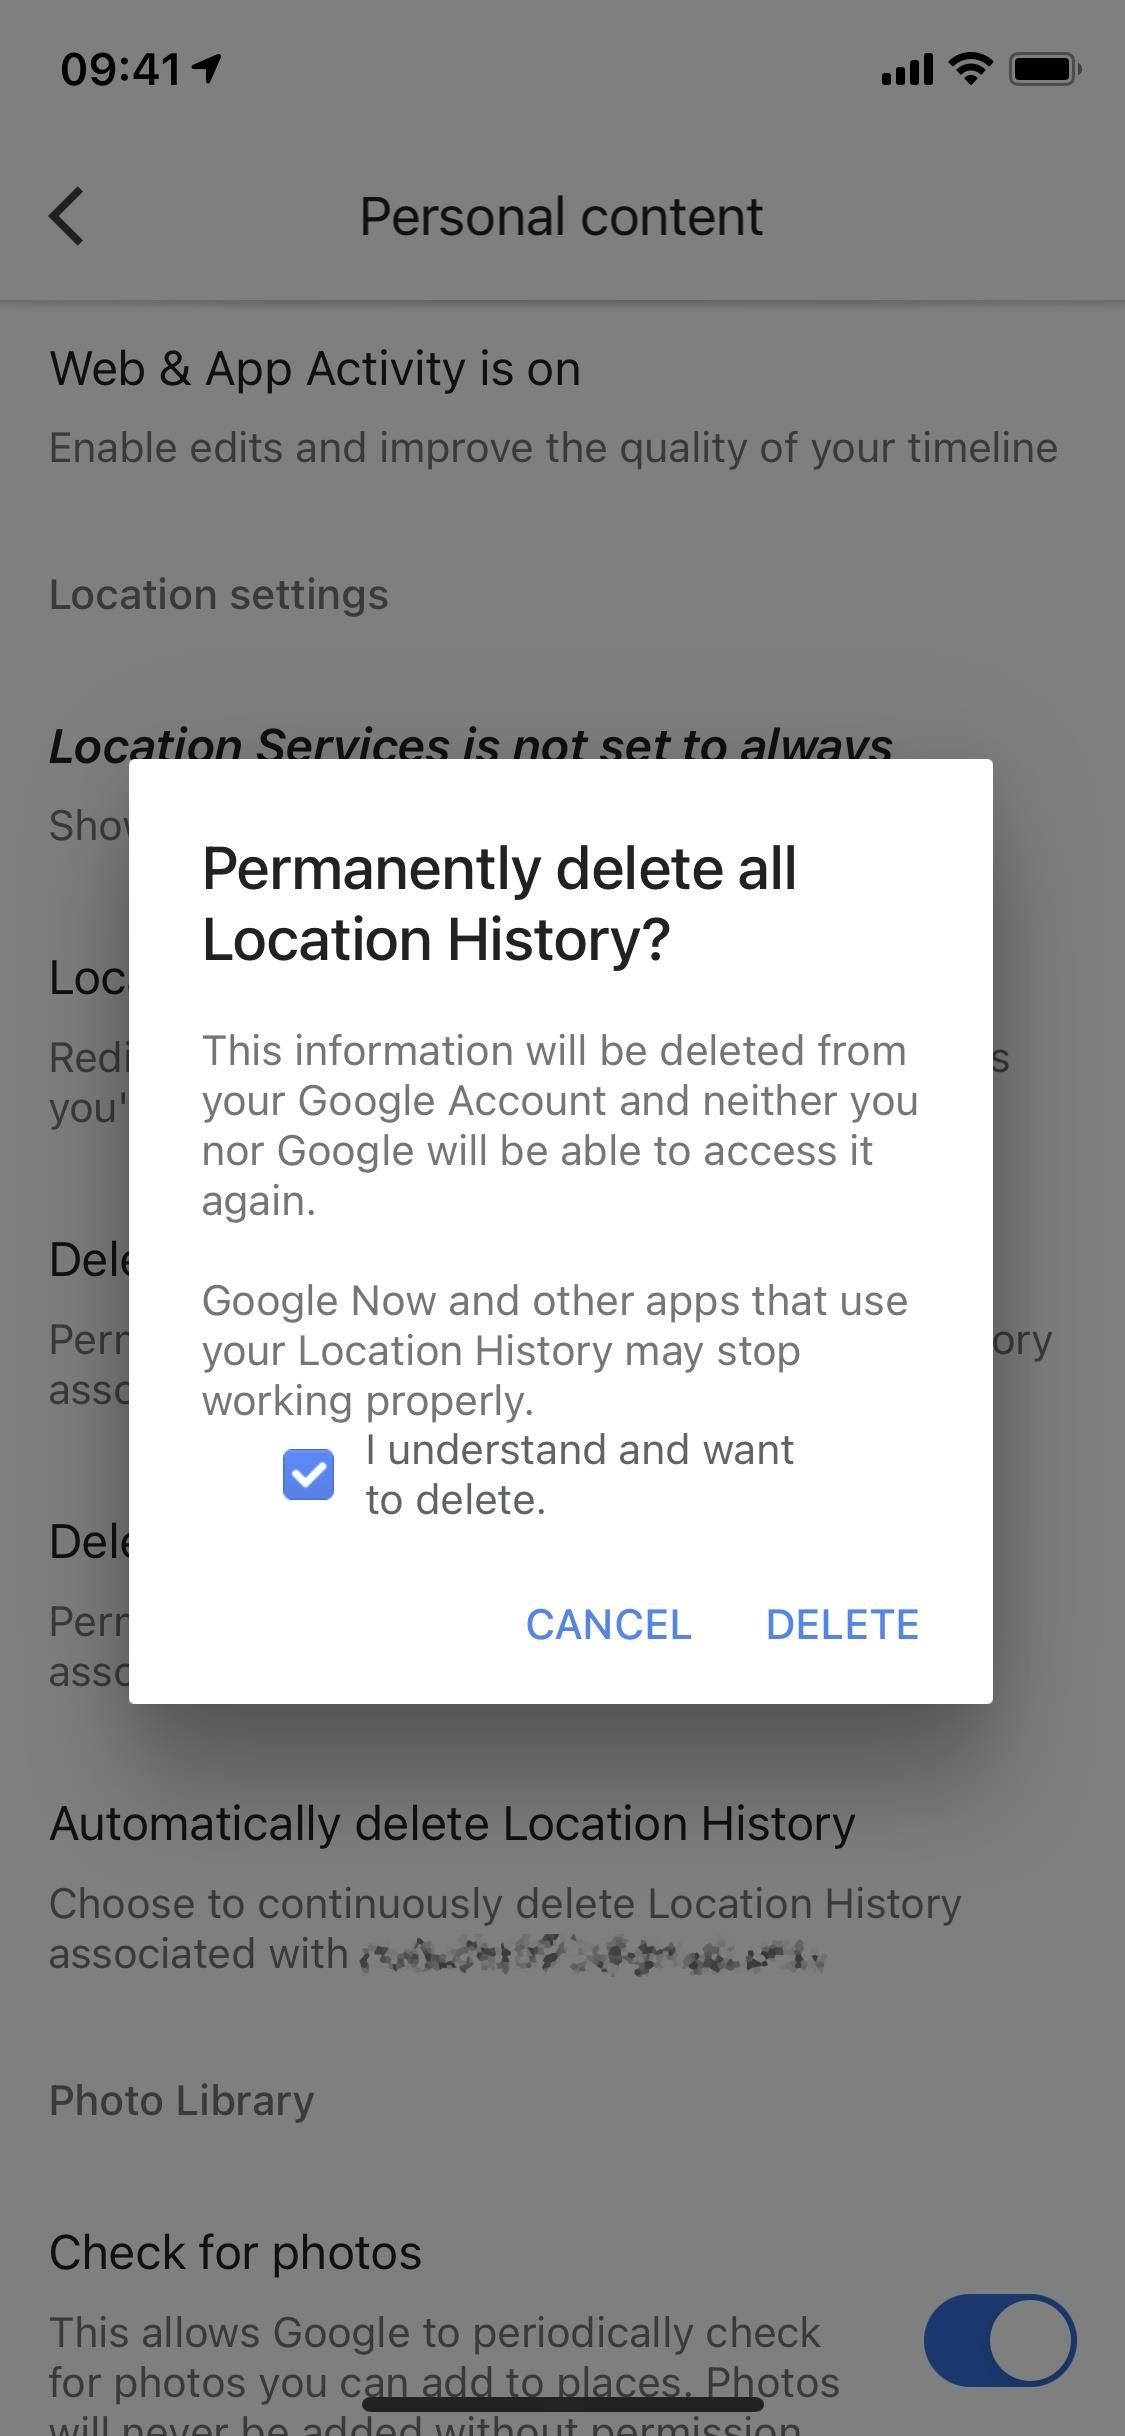 How to Disable or Delete Your Location History in Google Maps for More Privacy